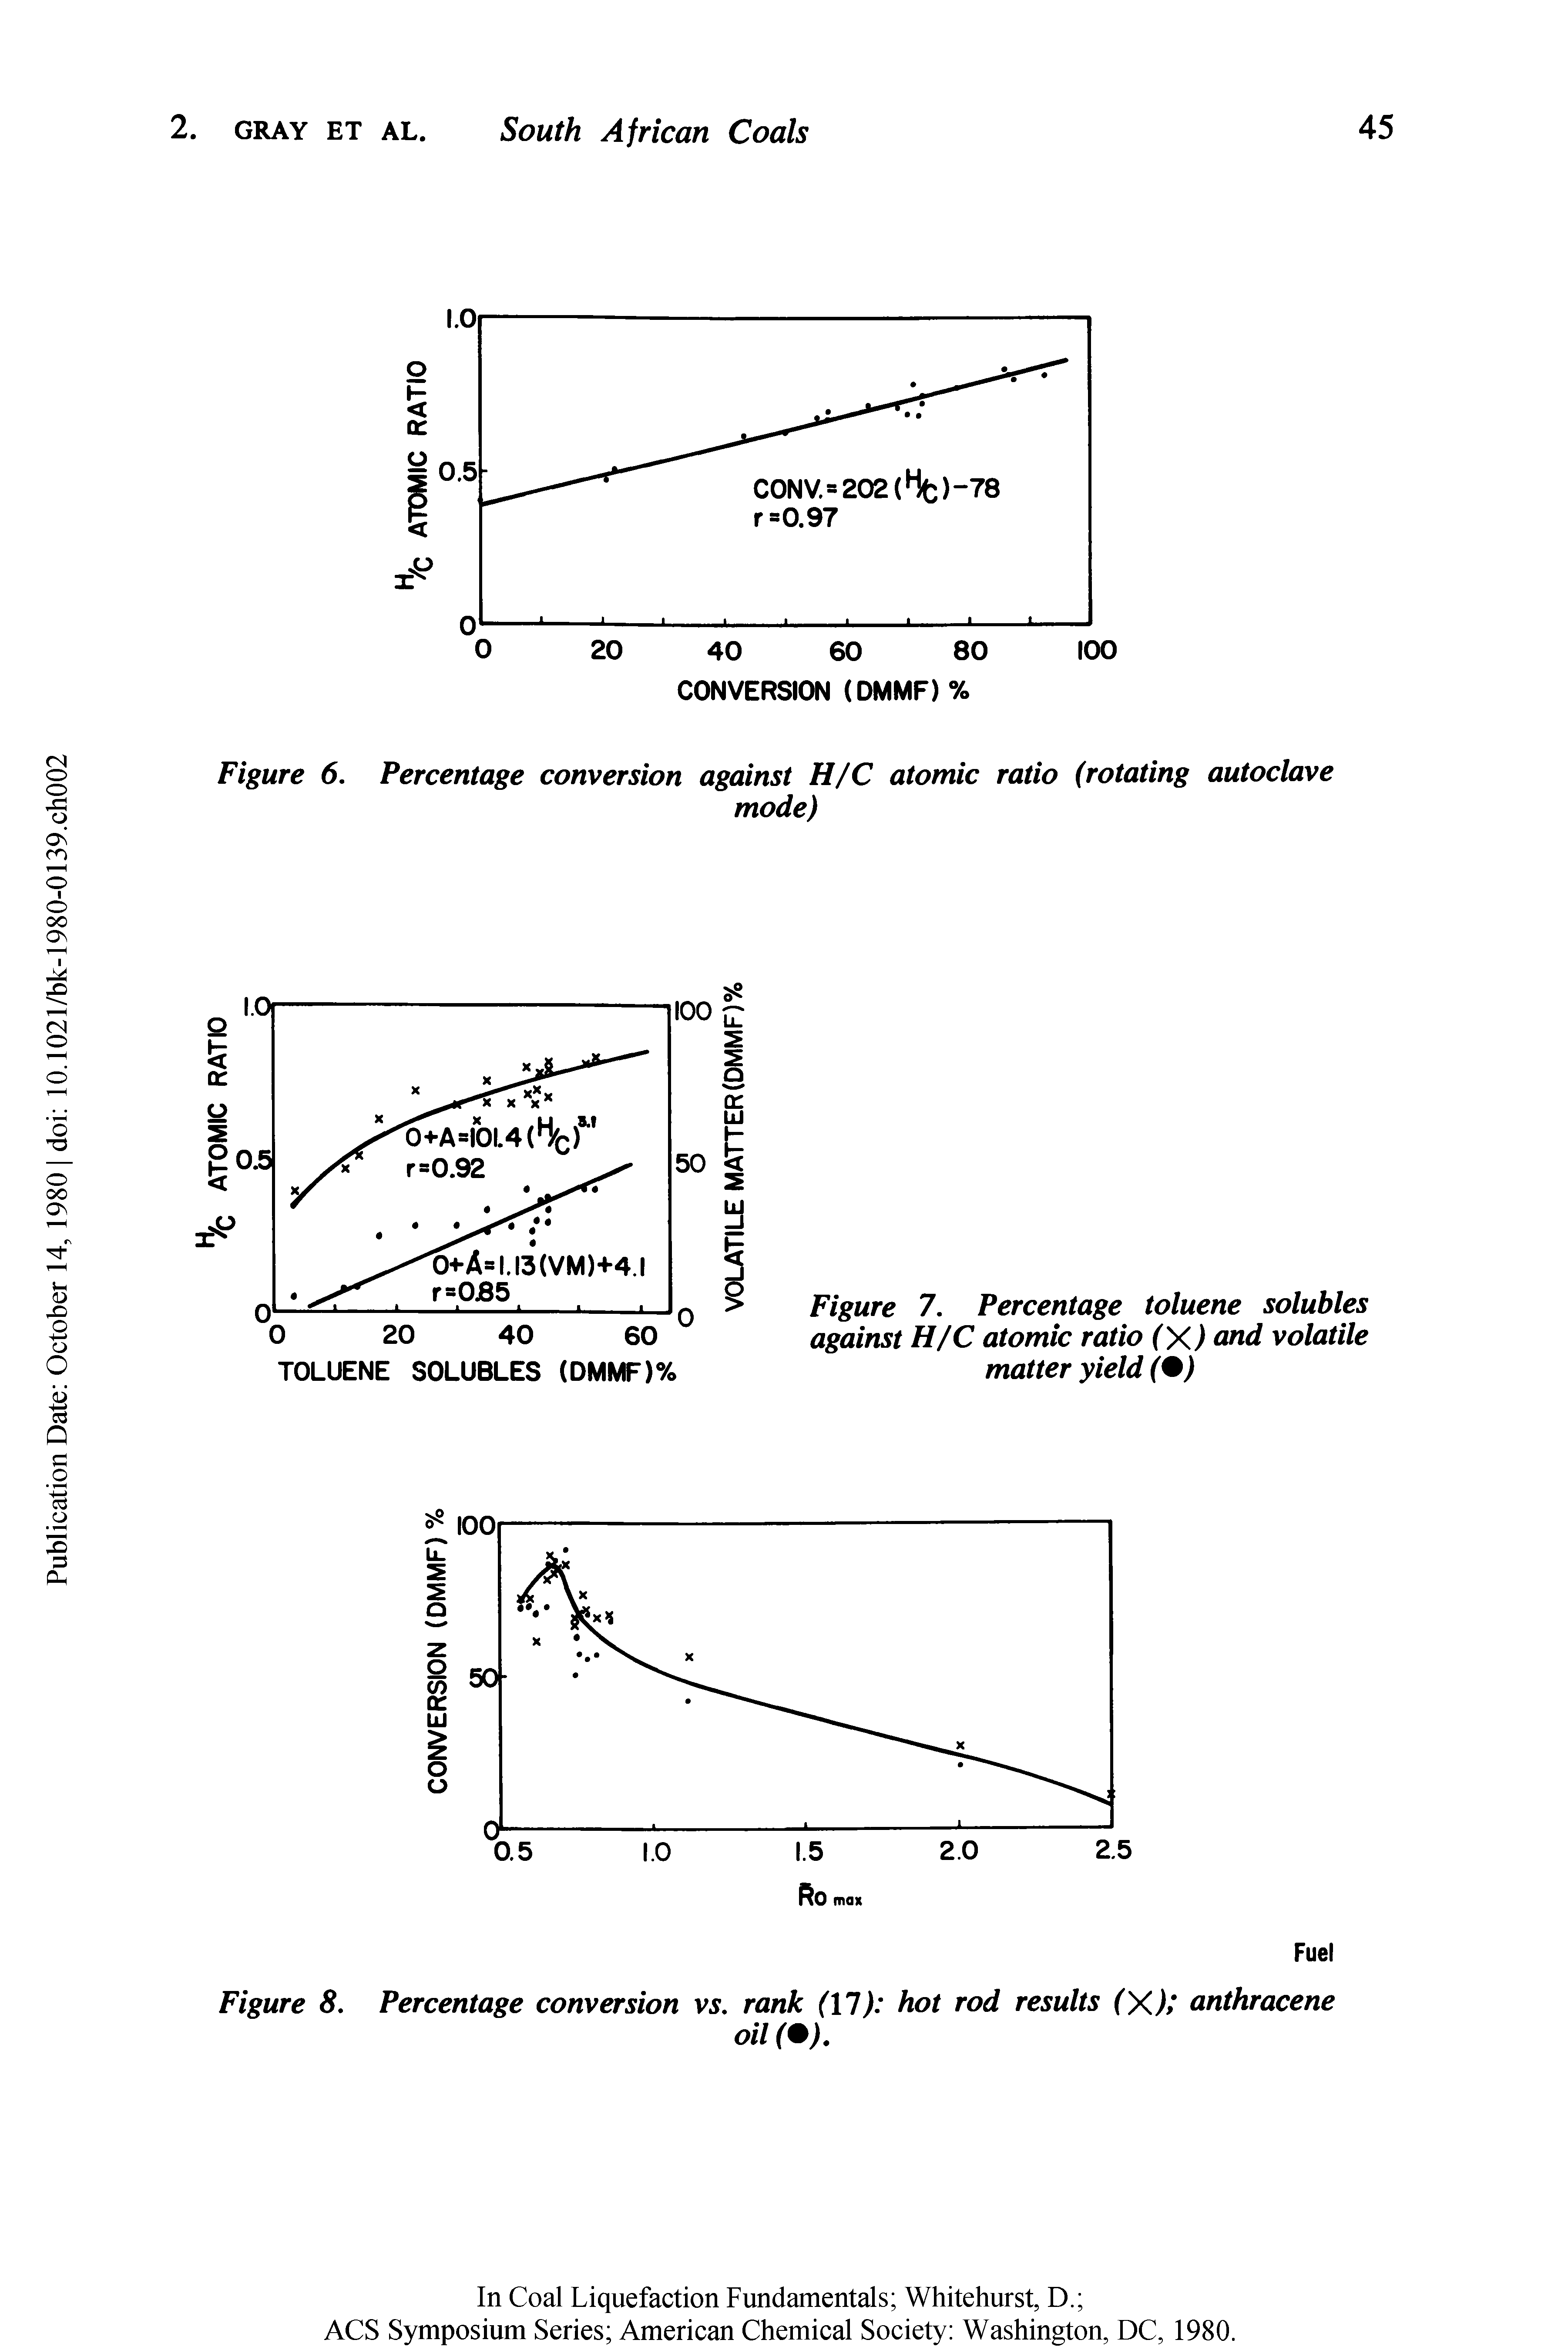 Figure 7. Percentage toluene solubles against H/C atomic ratio (X) and volatile matter yield (+)...